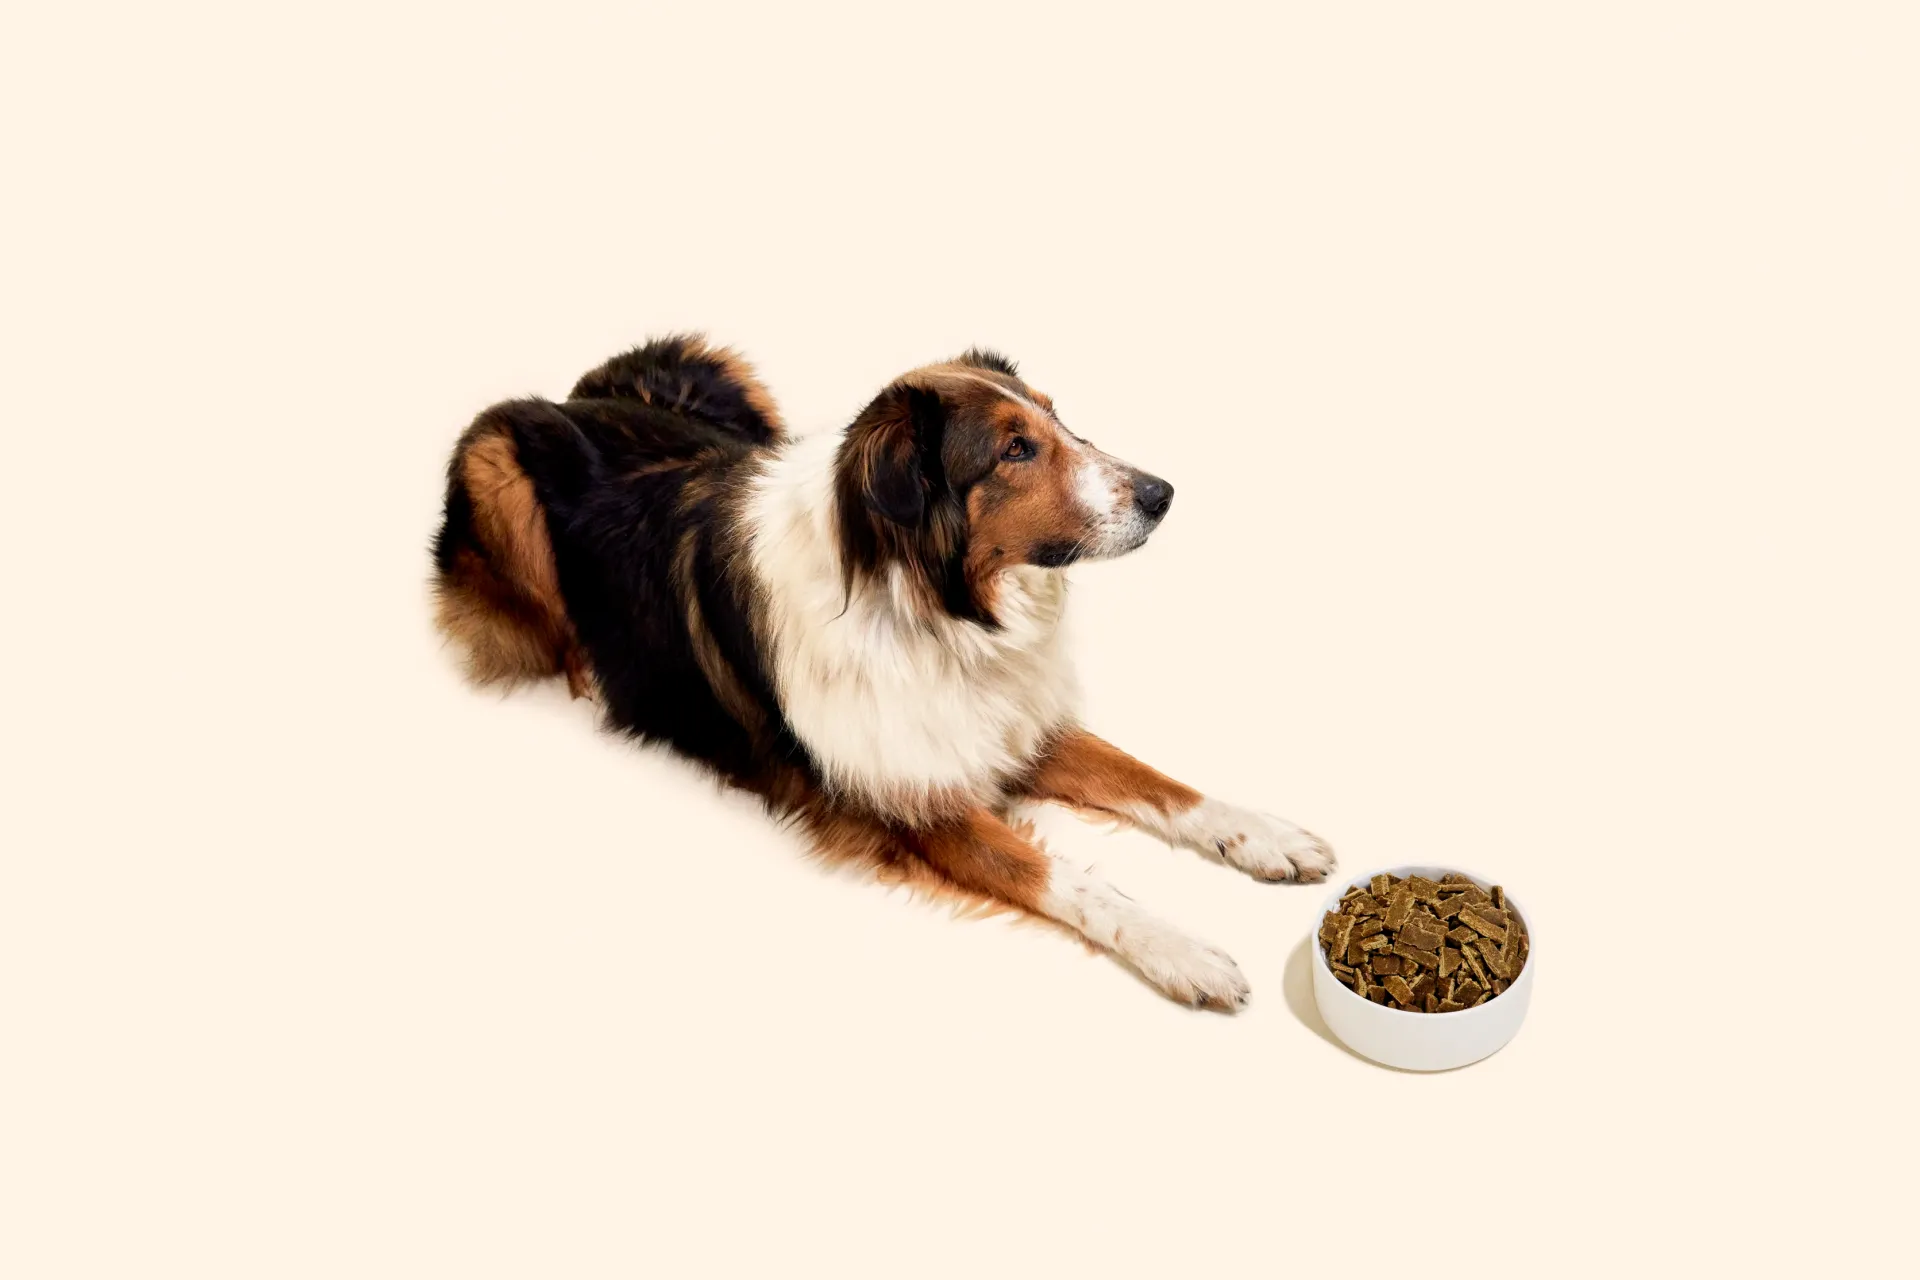 Collie eating from a bowl of Sundays chicken dog food